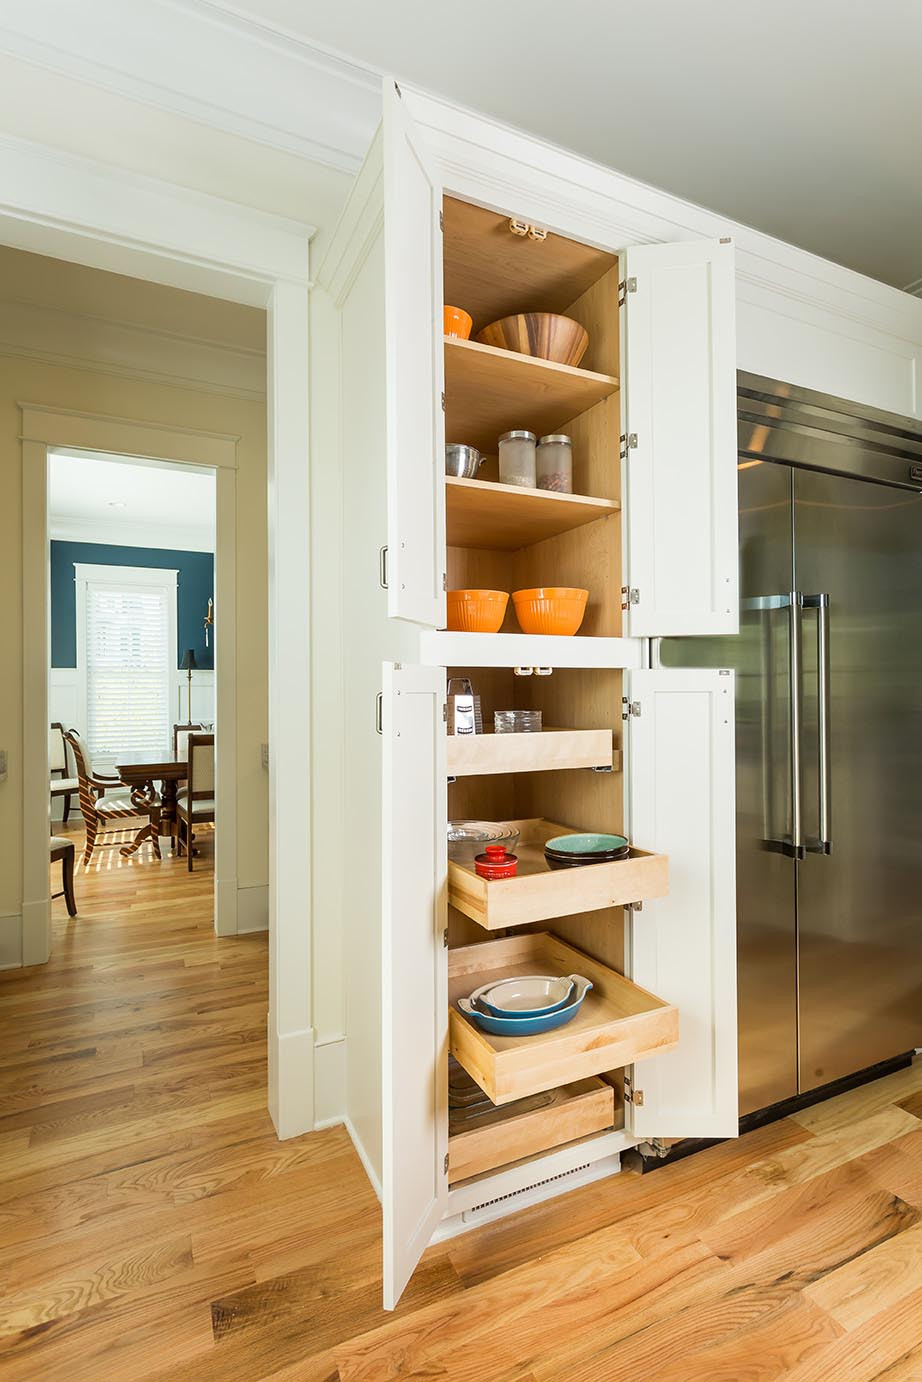 Tall White Kitchen Cabinet
 Luxury South Carolina Home features Inset Shaker Cabinets